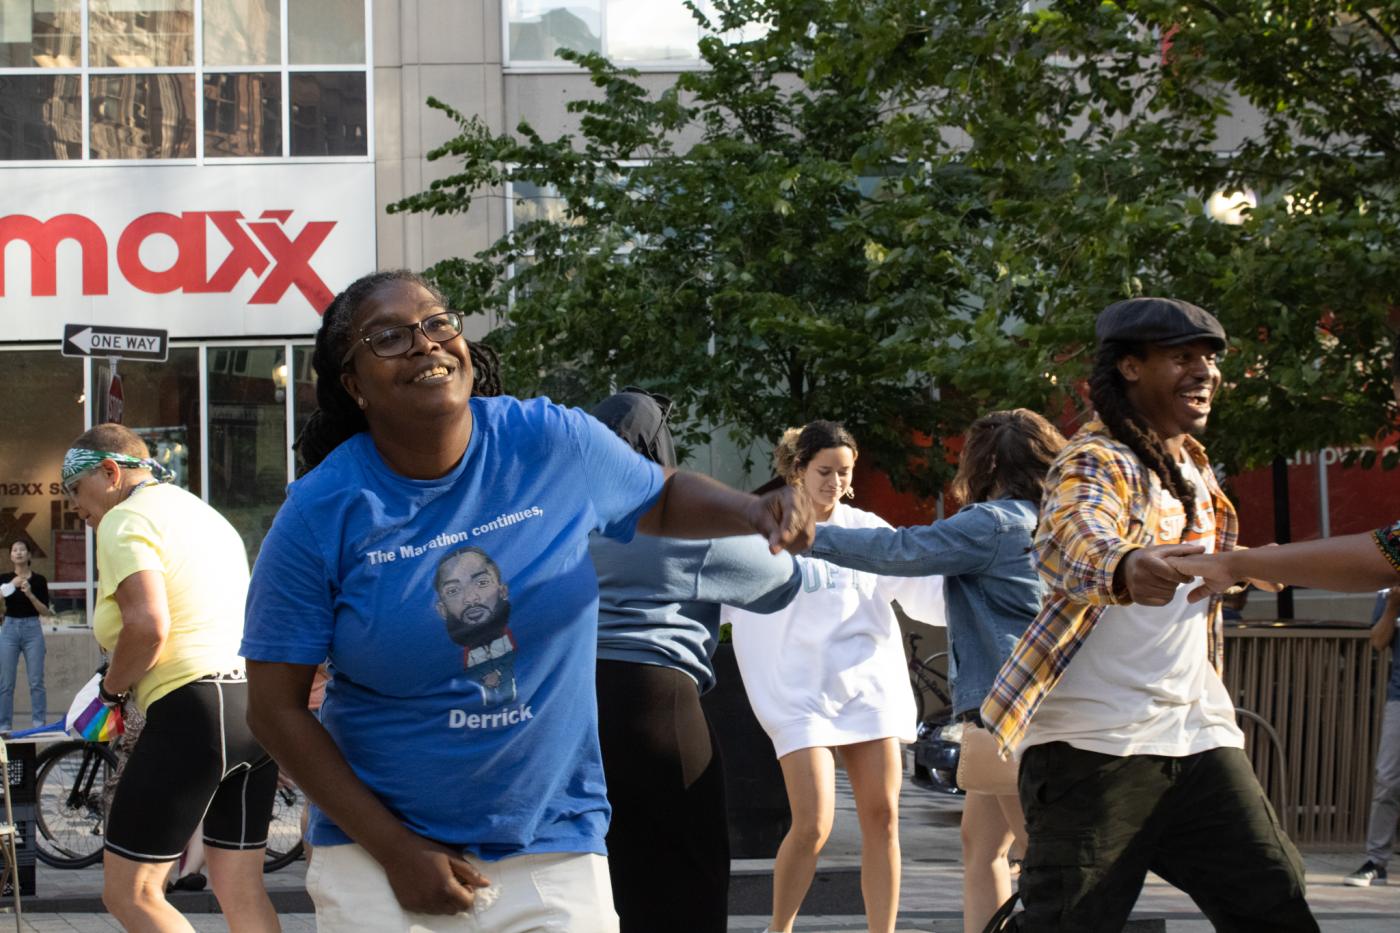 Outside, in a city center by stores, folks of color dance and smile.